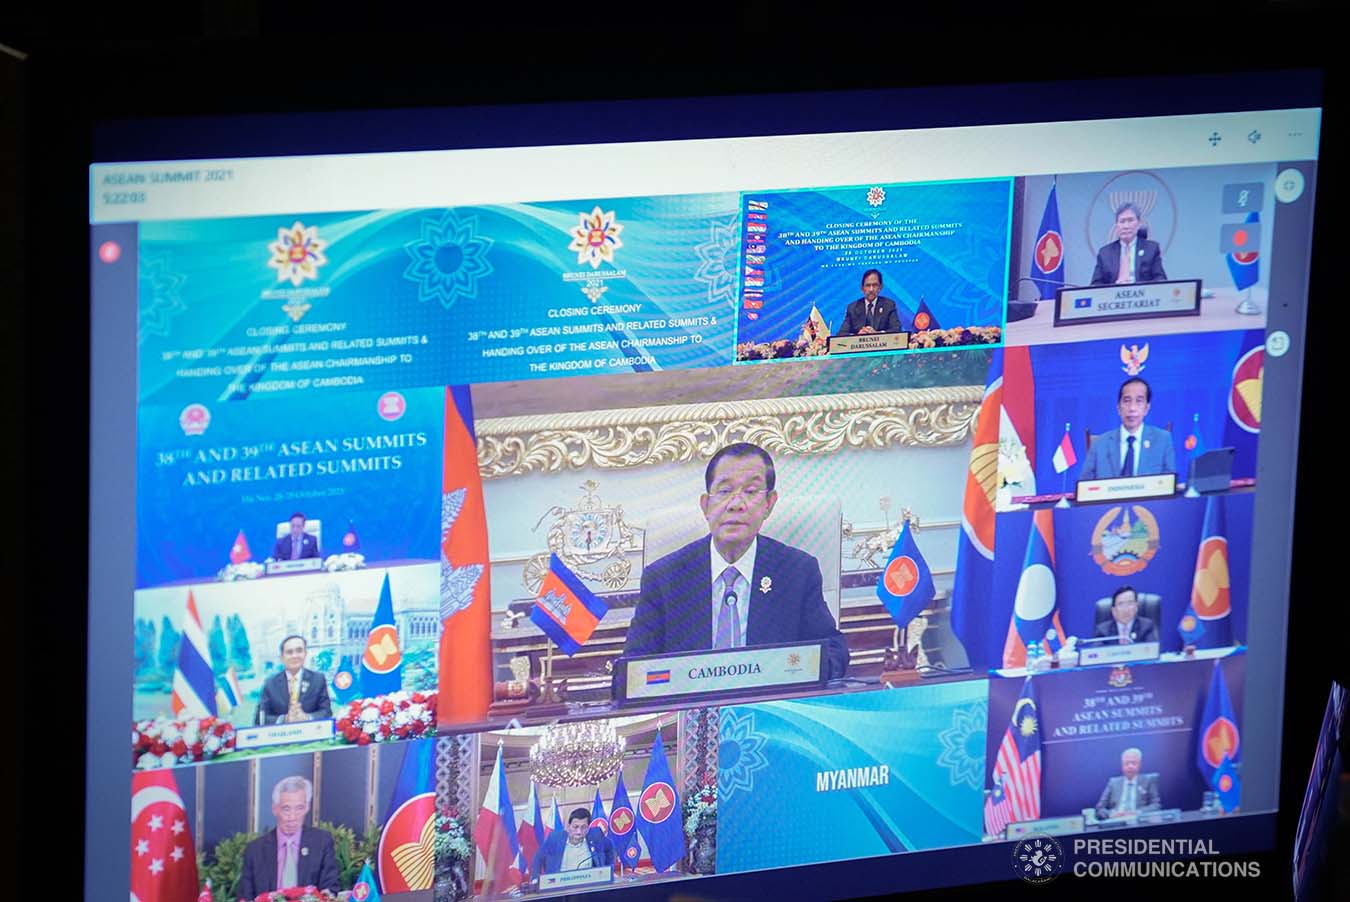 President Rodrigo Roa Duterte together with other leaders from Association of Southeast Asian Nations (ASEAN) member countries are shown on-screen as incoming ASEAN chairman, Kingdom of Cambodia Prime Minister Hun Sen accepts the chairmanship during the closing ceremony of the virtual 38th and 39th Association of Southeast Asian Nations (ASEAN) Summits and Related Summits hosted by Brunei Darussalam at the Malacañang Palace on October 28, 2021. KING RODRIGUEZ/ PRESIDENTIAL PHOTO